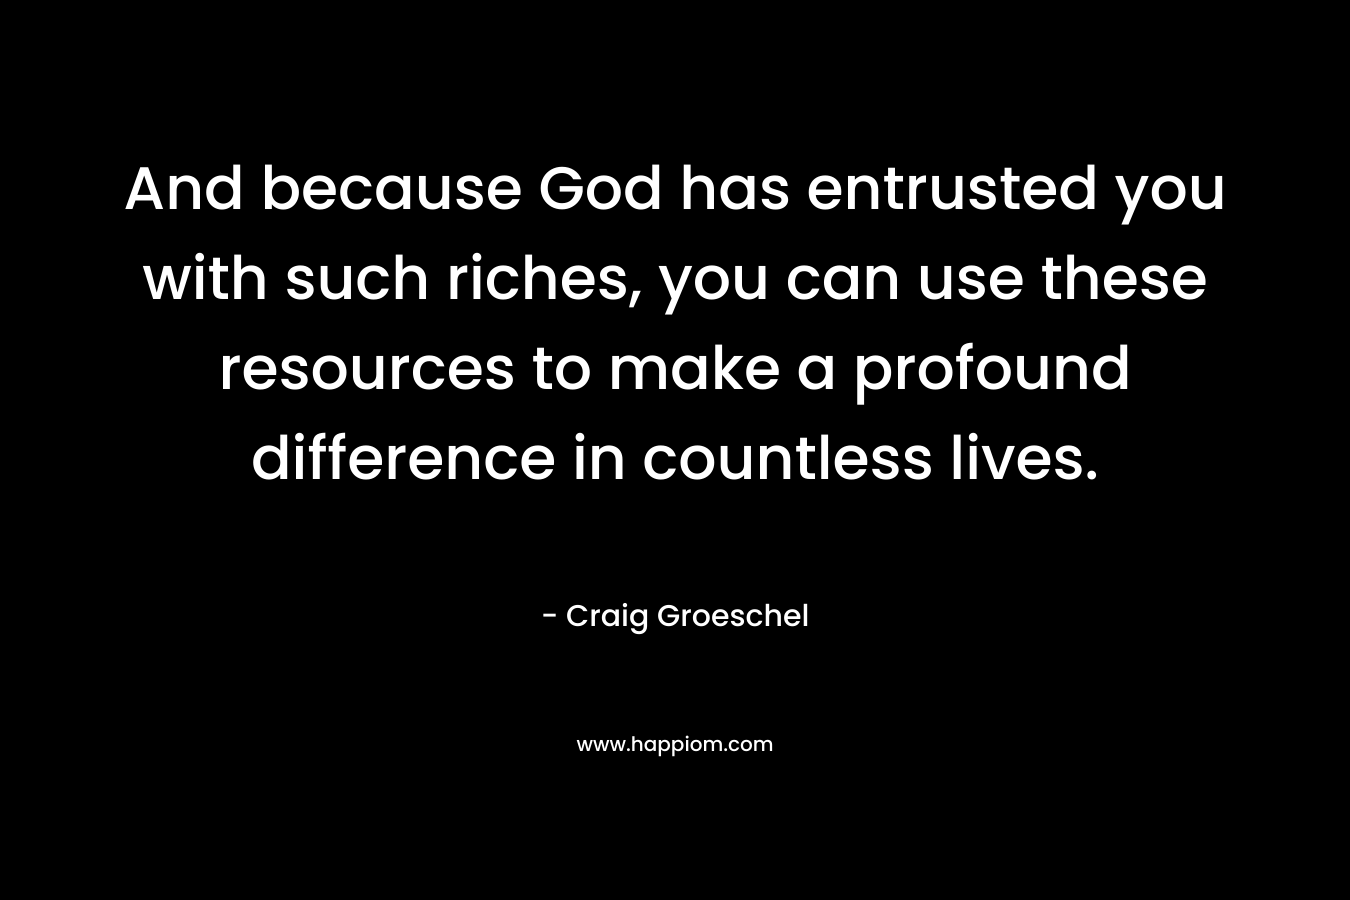 And because God has entrusted you with such riches, you can use these resources to make a profound difference in countless lives. – Craig Groeschel